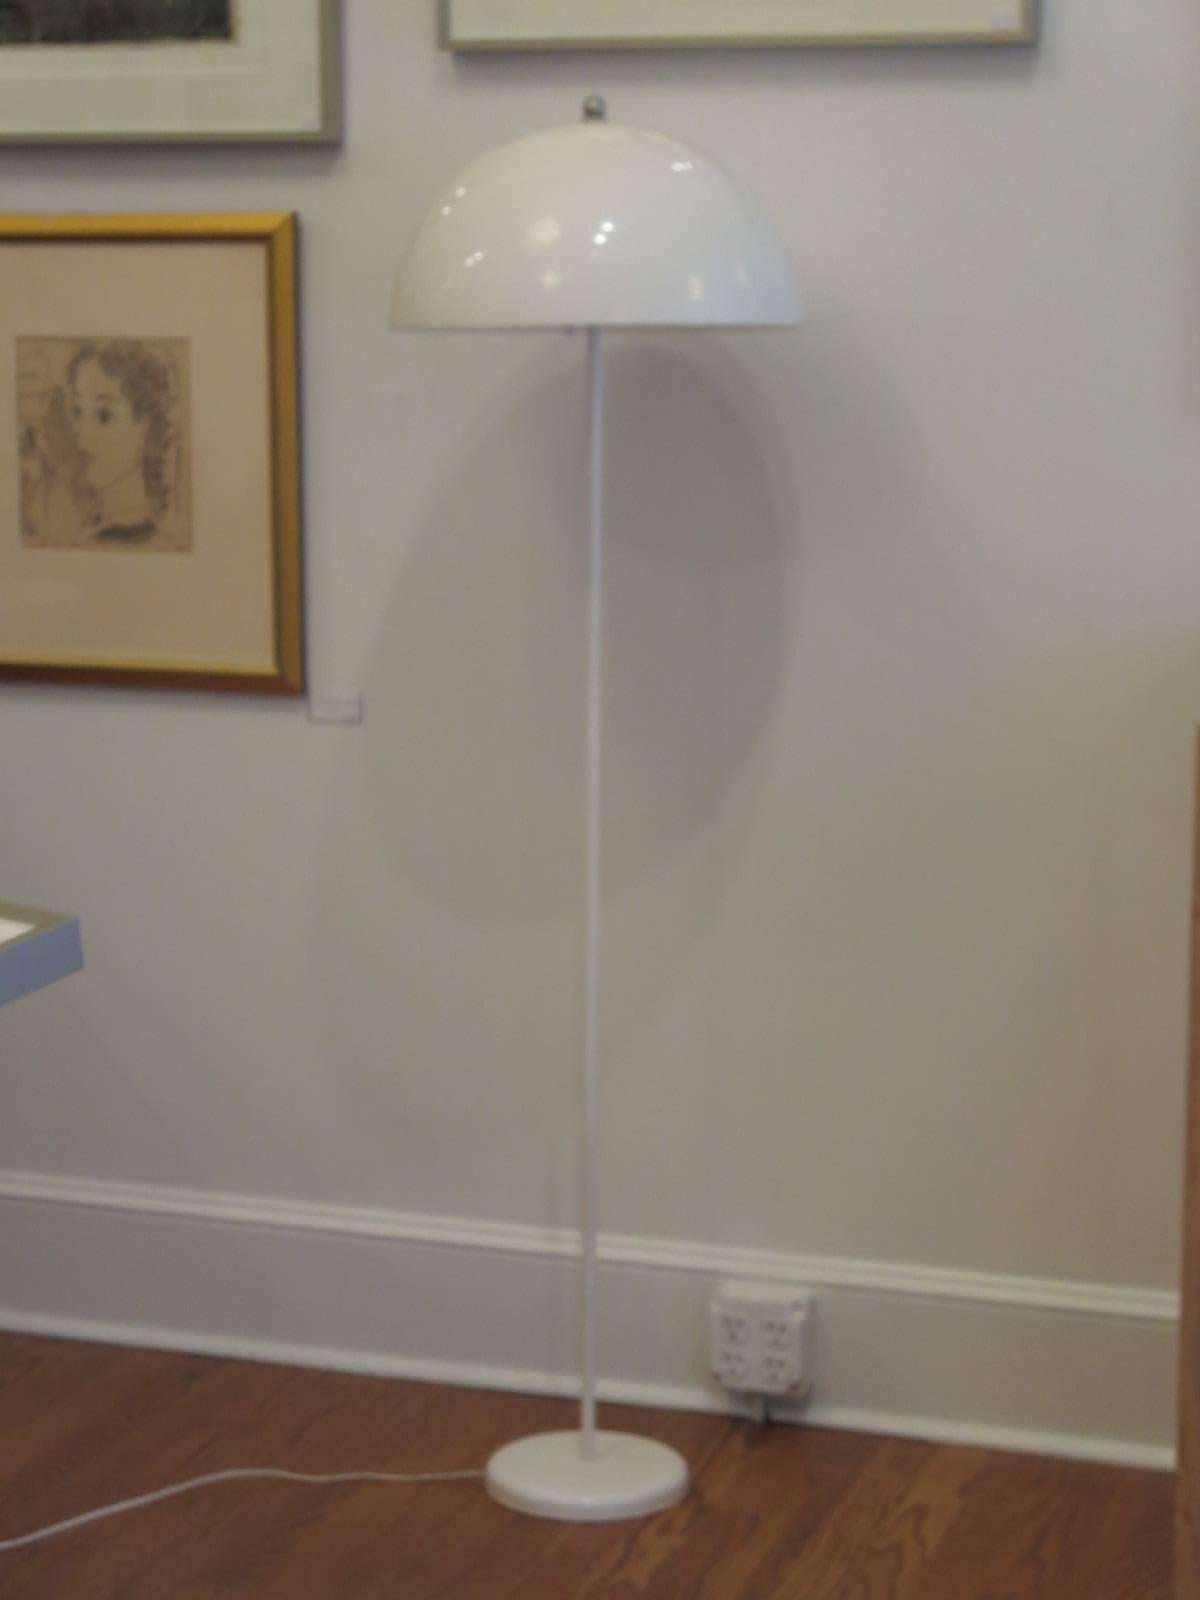 Floor lamp with a soft white color shade on a metal stand.